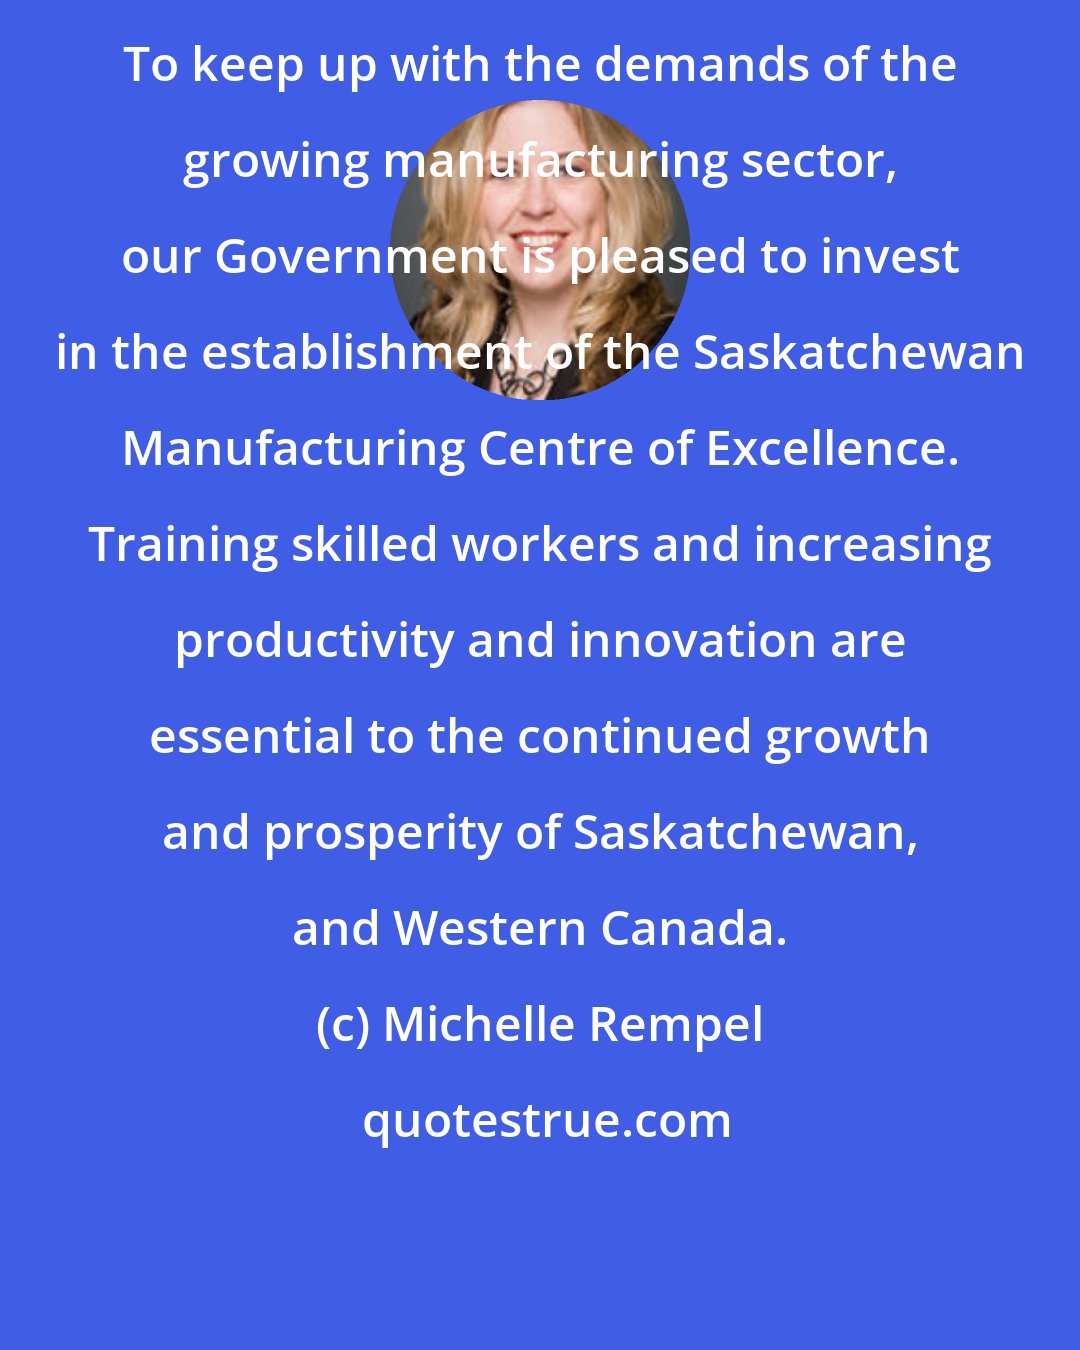 Michelle Rempel: To keep up with the demands of the growing manufacturing sector, our Government is pleased to invest in the establishment of the Saskatchewan Manufacturing Centre of Excellence. Training skilled workers and increasing productivity and innovation are essential to the continued growth and prosperity of Saskatchewan, and Western Canada.